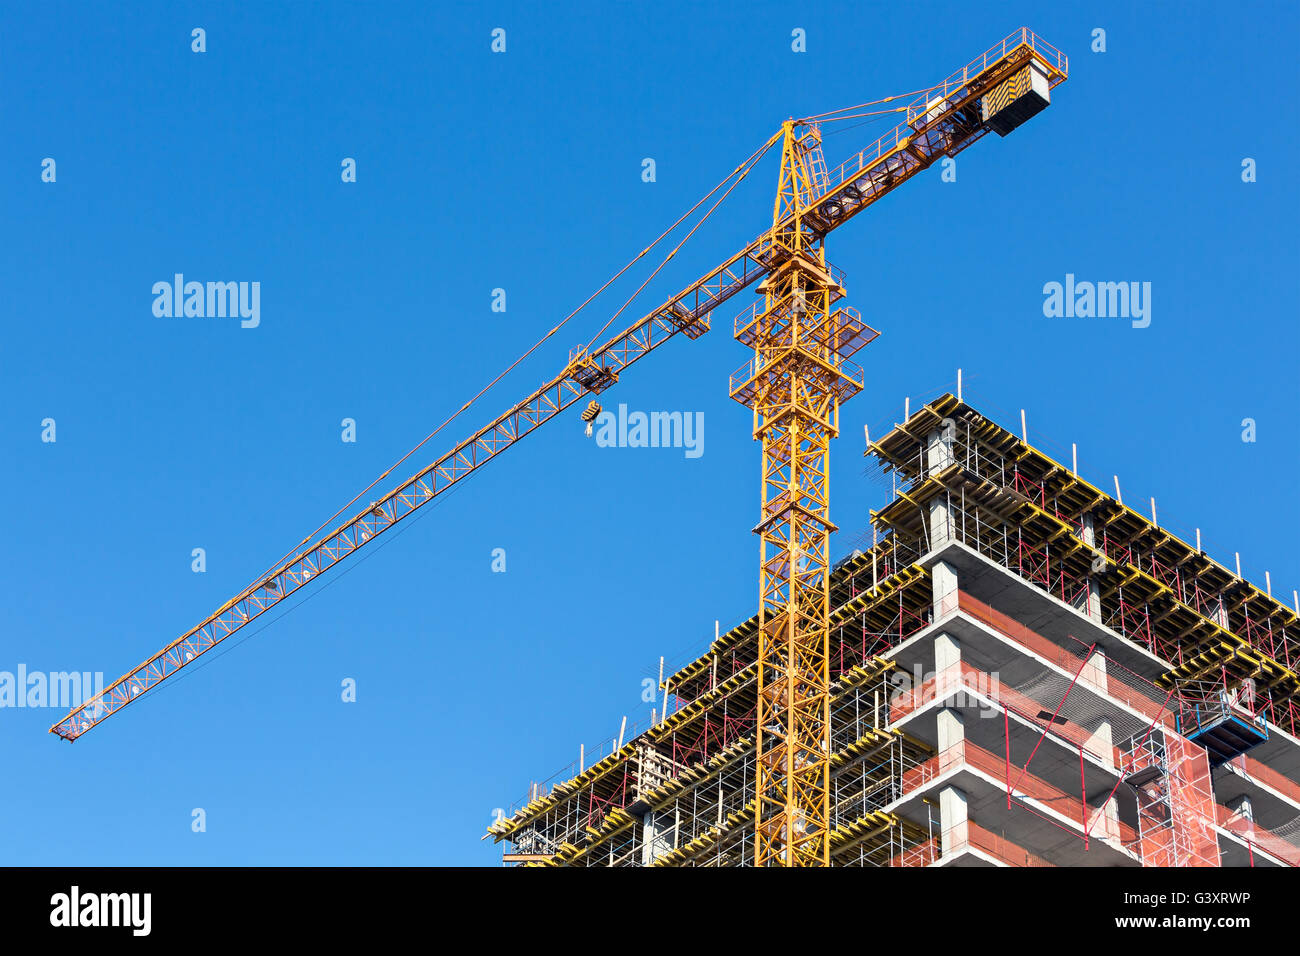 Building construction site against blue sky with tower crane Stock Photo